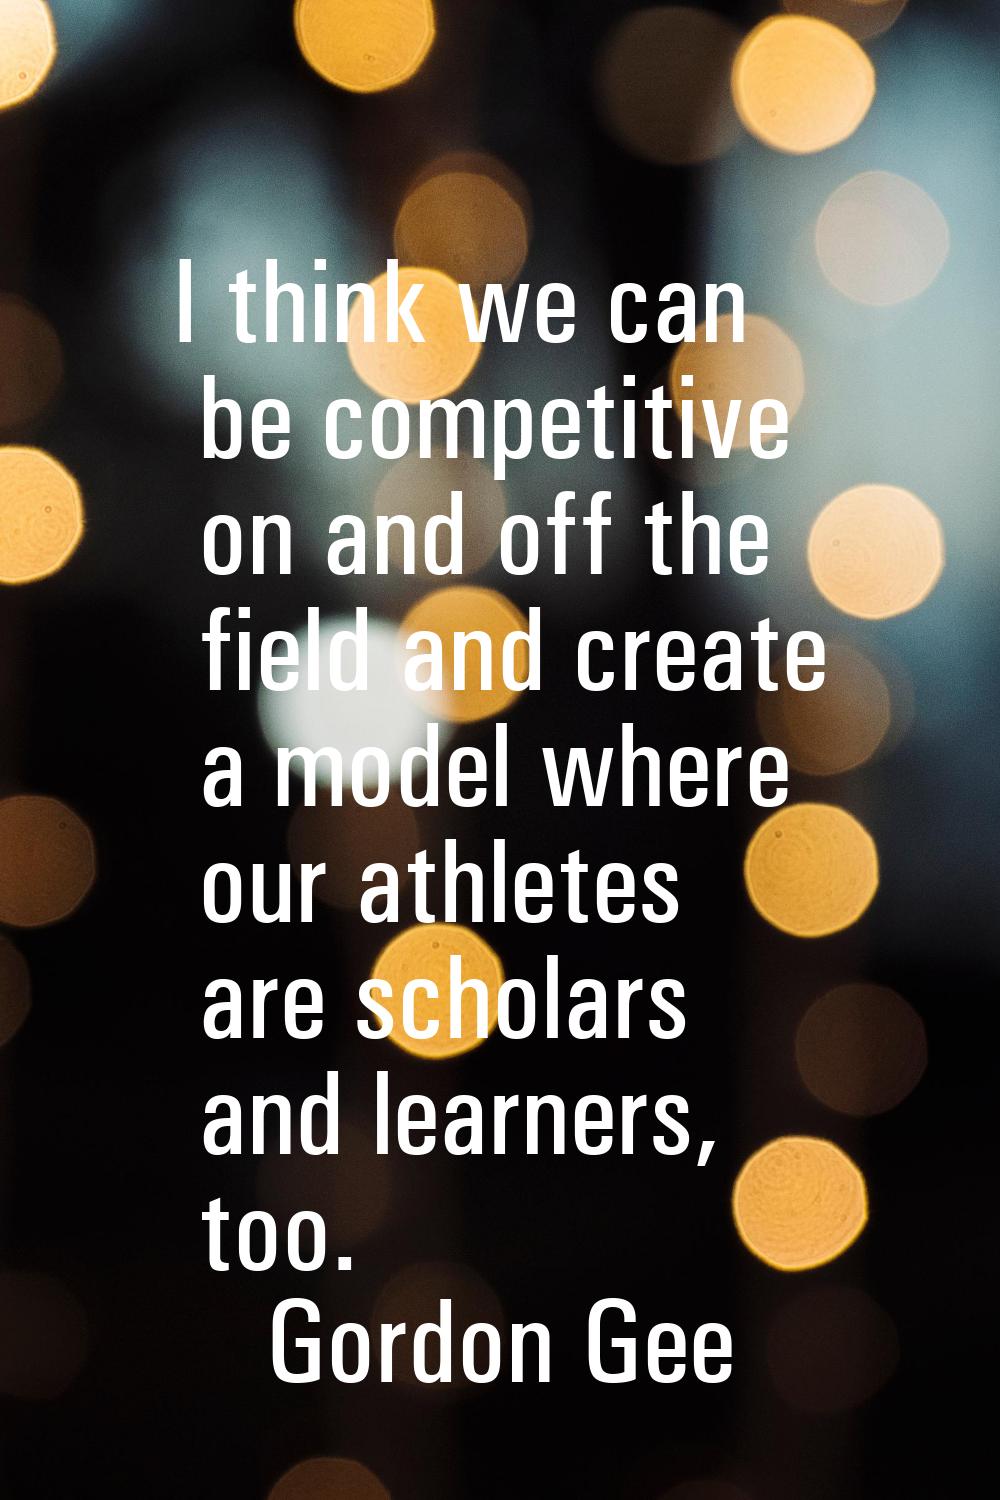 I think we can be competitive on and off the field and create a model where our athletes are schola